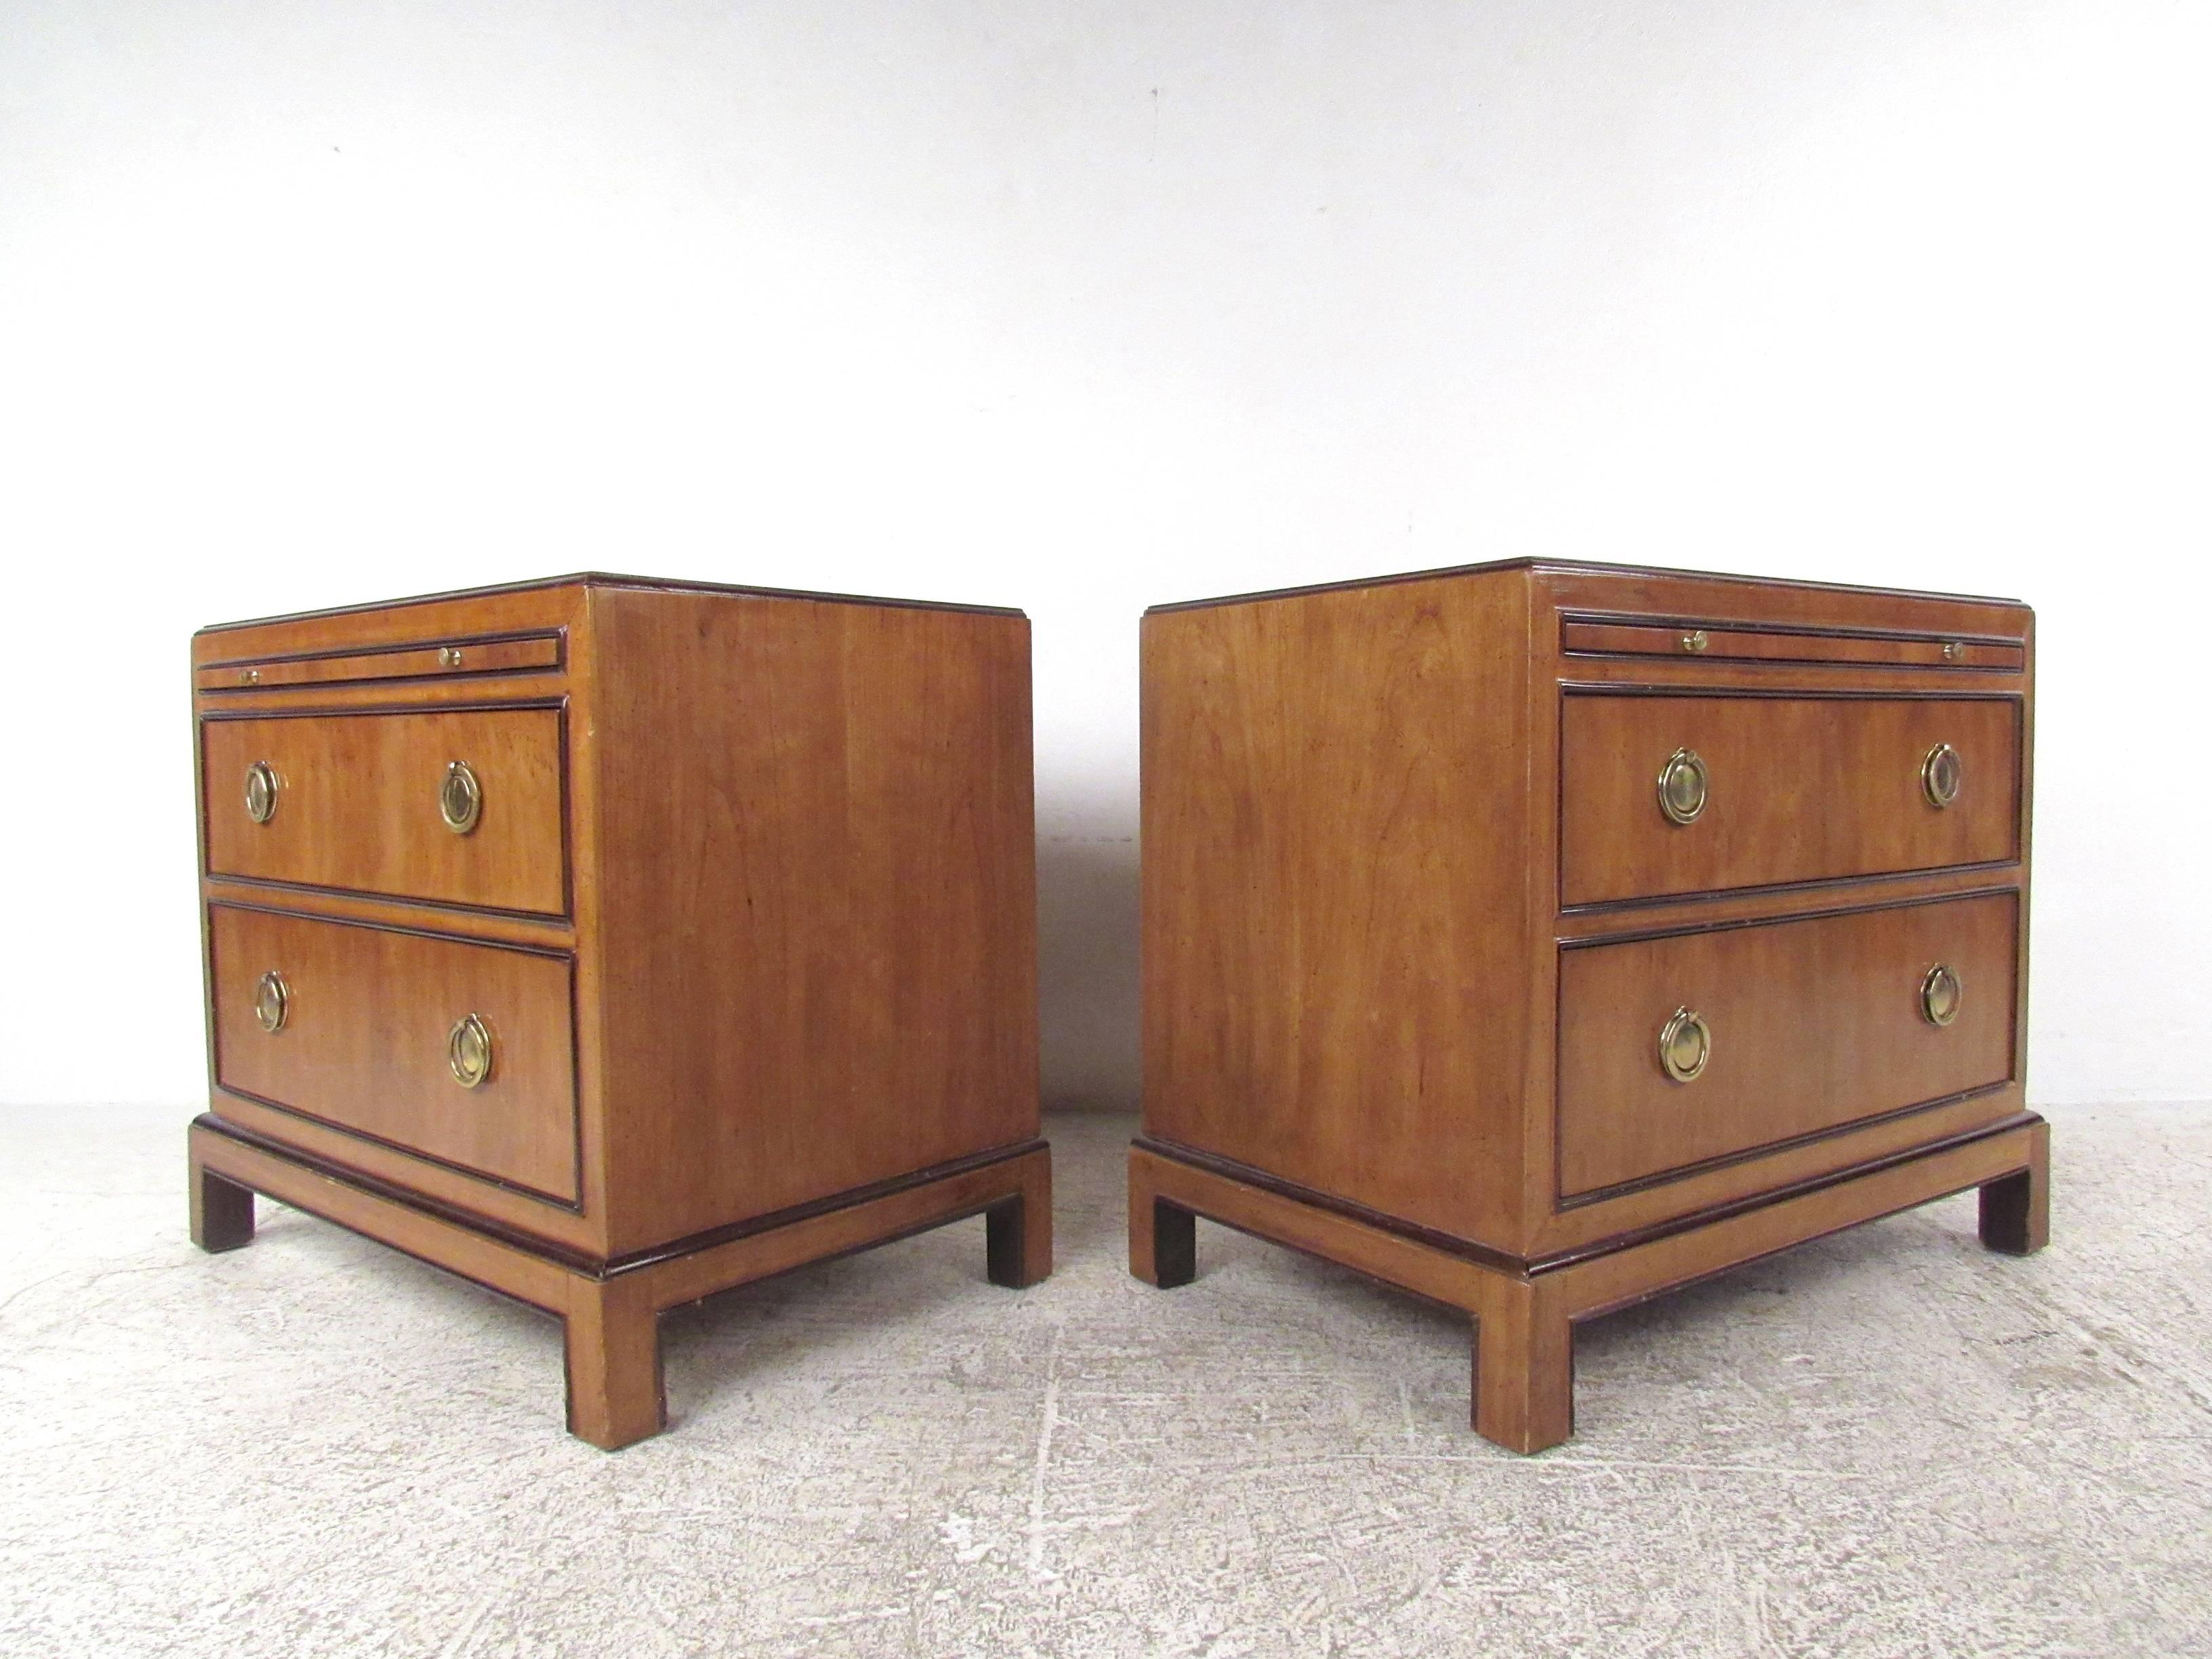 American Pair of Mid-Century Modern Bedside Tables by Drexel